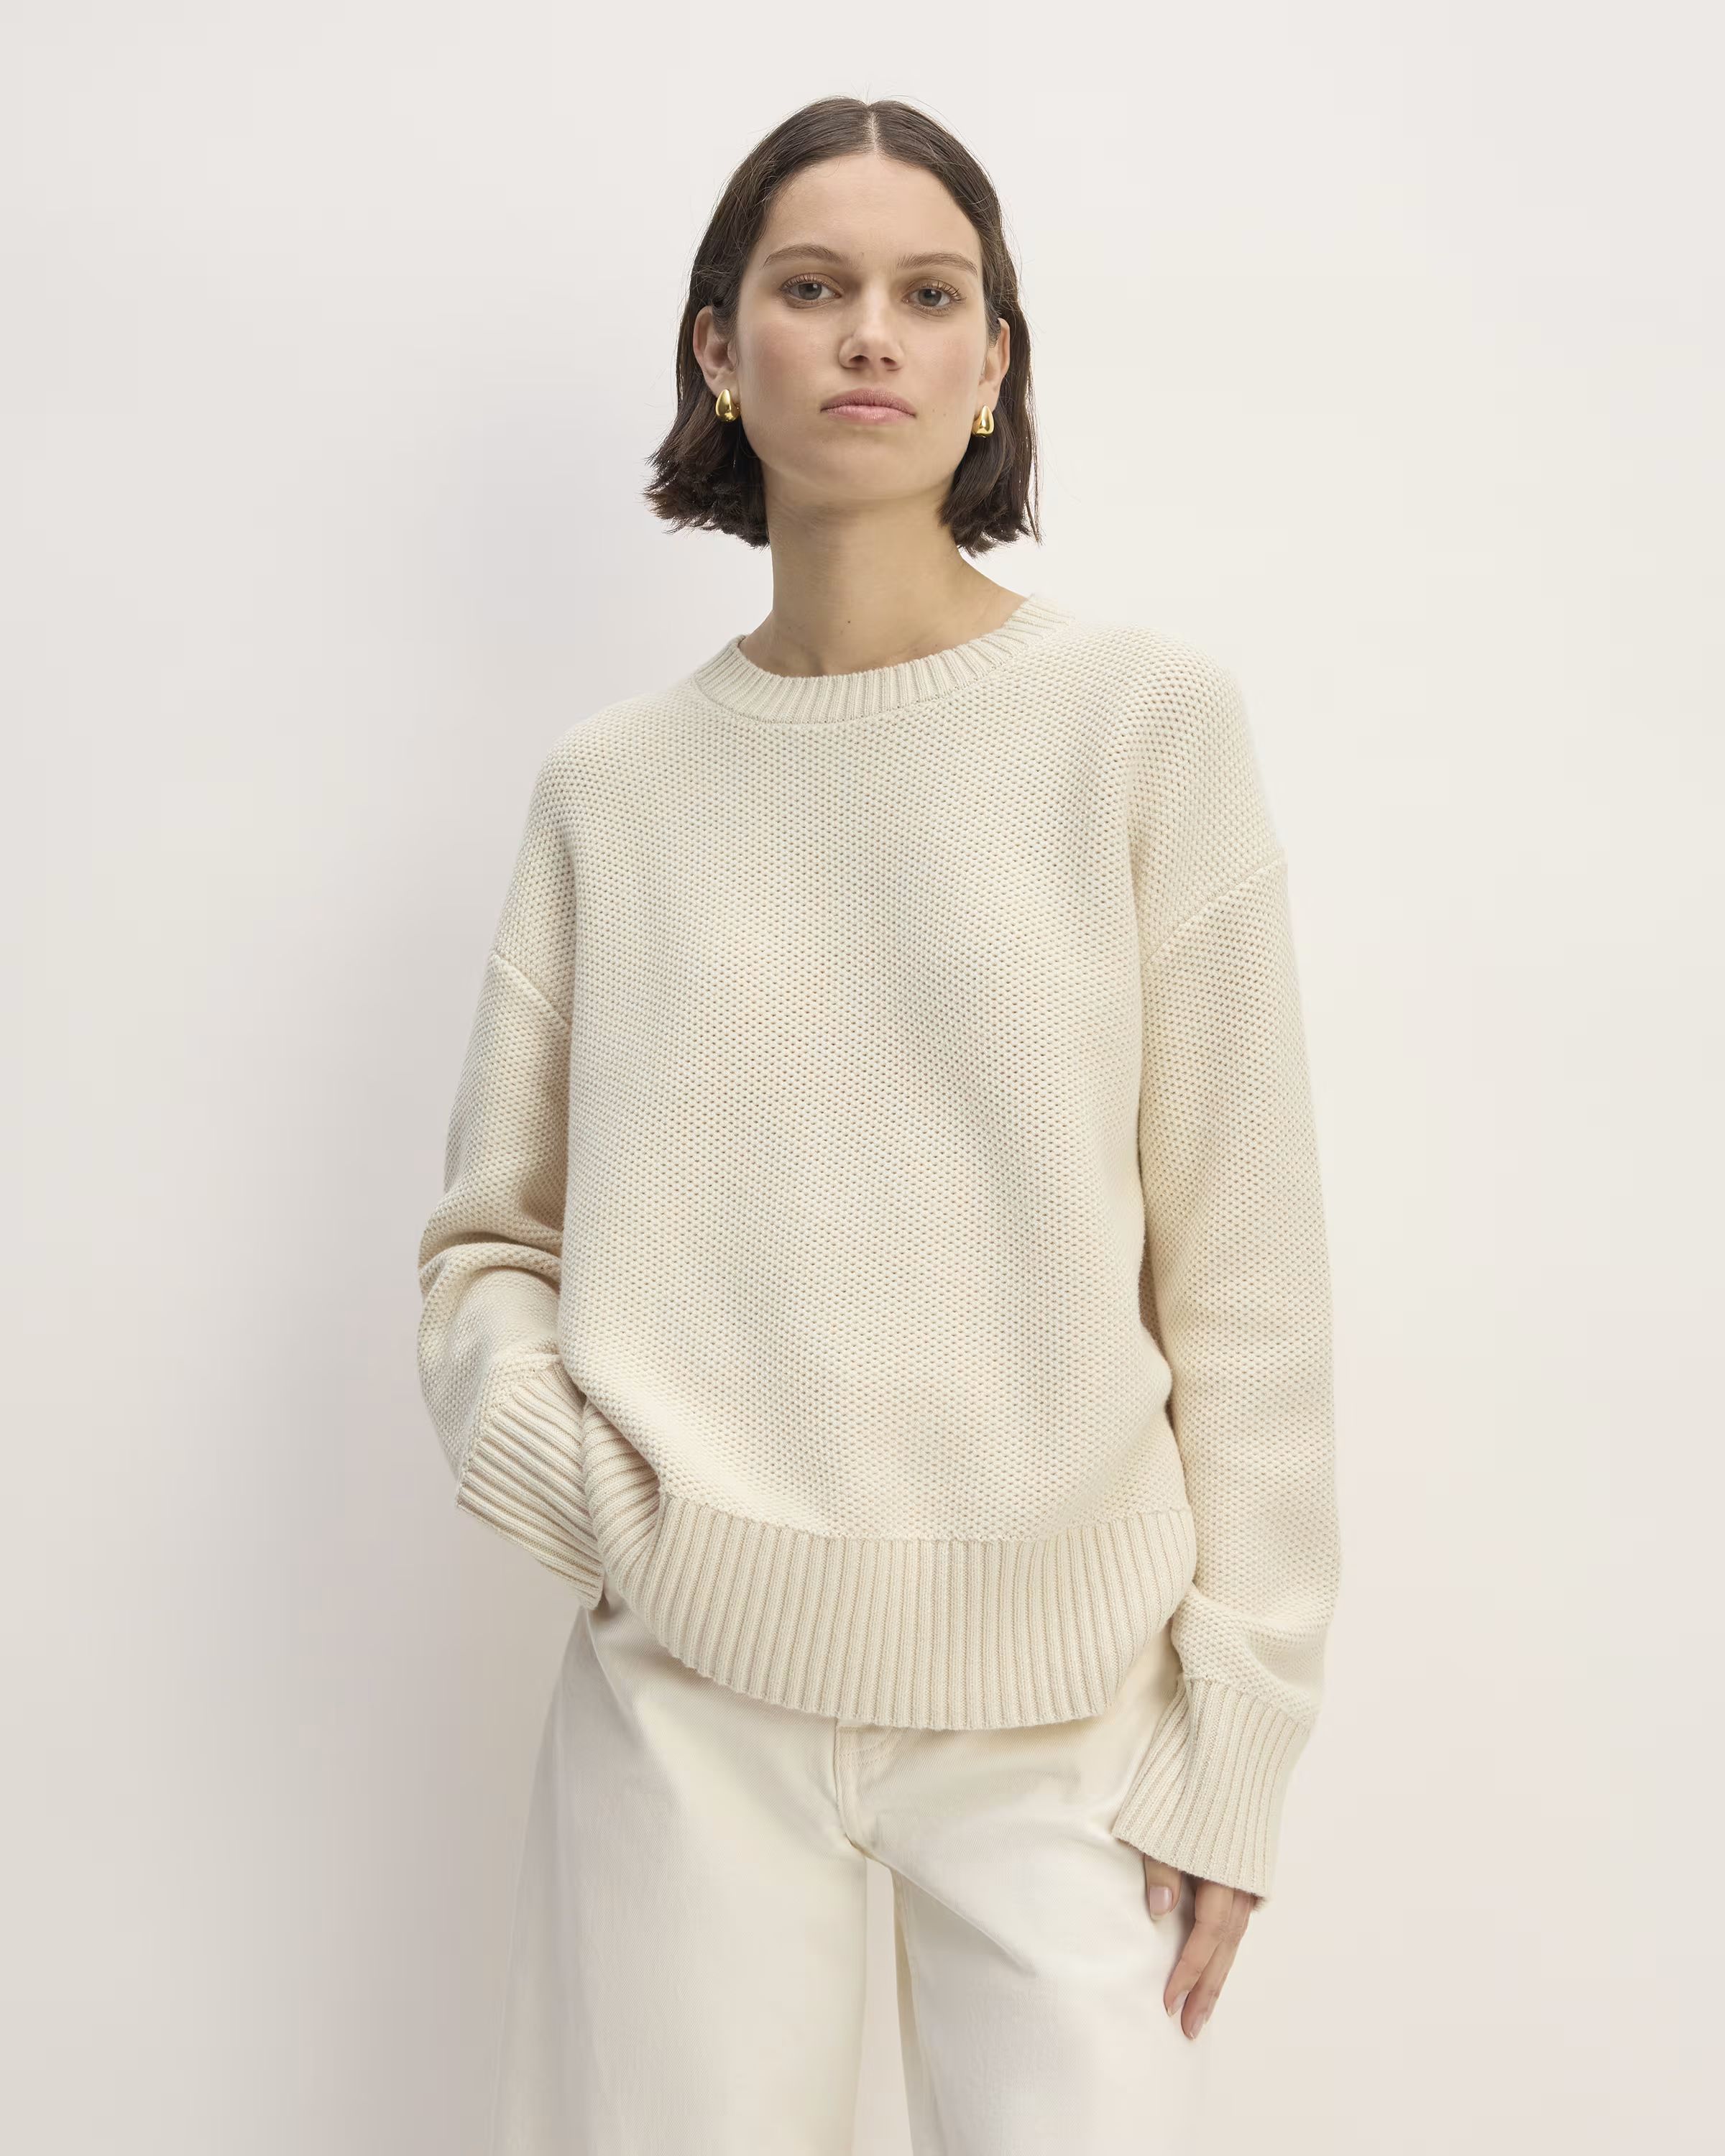 The Cotton Honeycomb Square Crew€1405.0 (1 Review)5.0 out of 5 stars. 1 review Price includes d... | Everlane